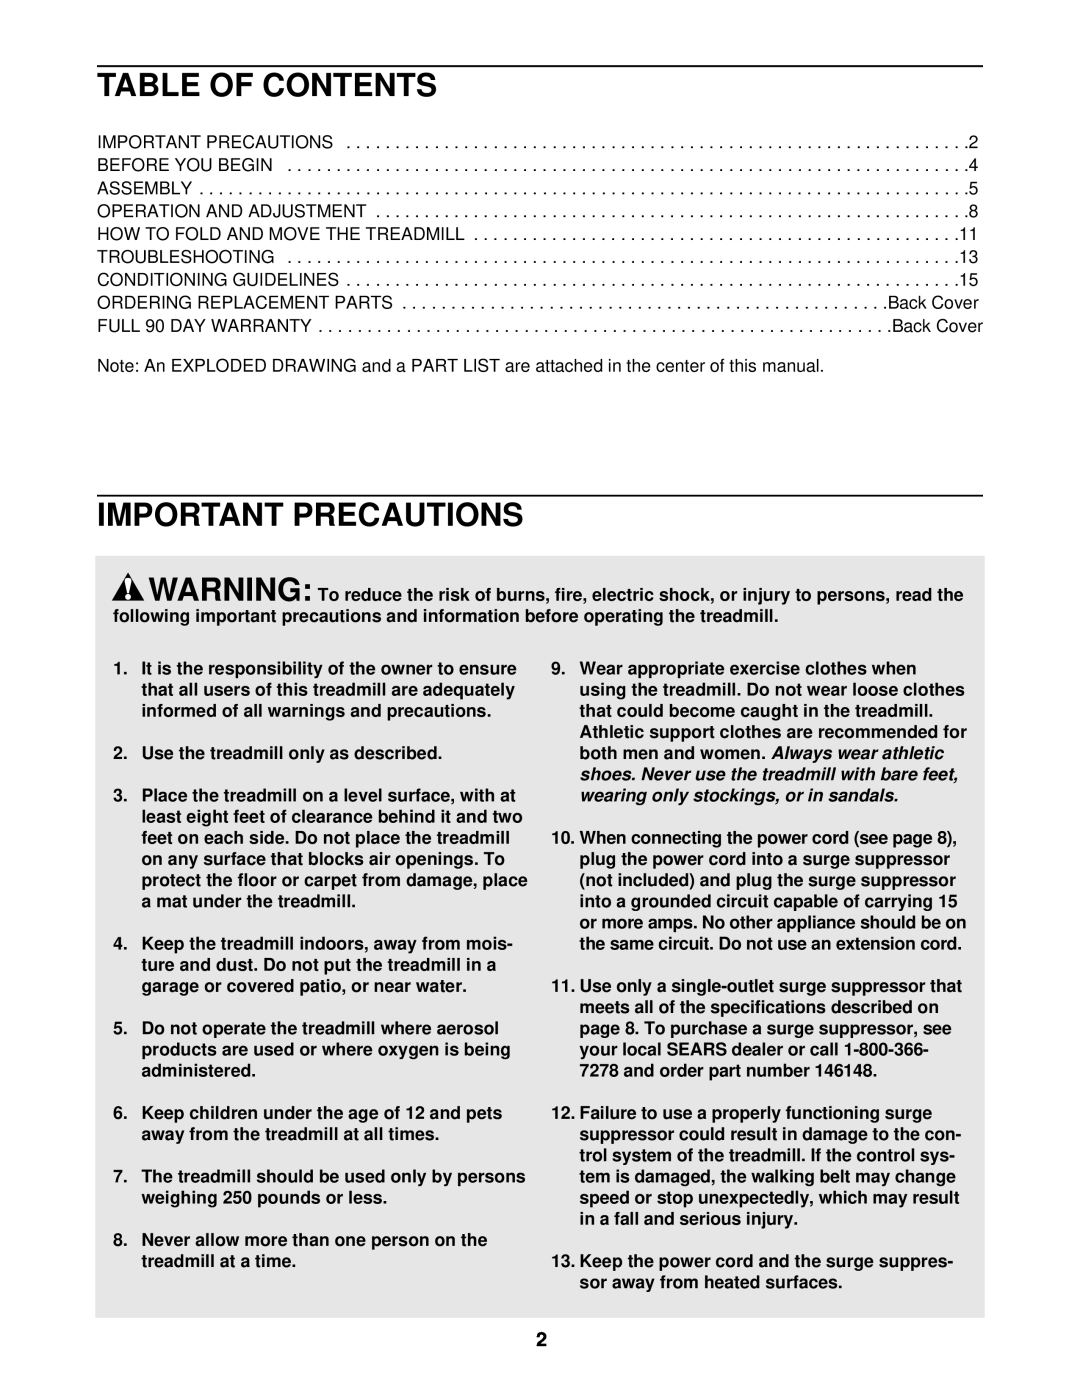 ProForm 831.293230 Table Of Contents, Important Precautions, Use the treadmill only as described, Before You Begin 